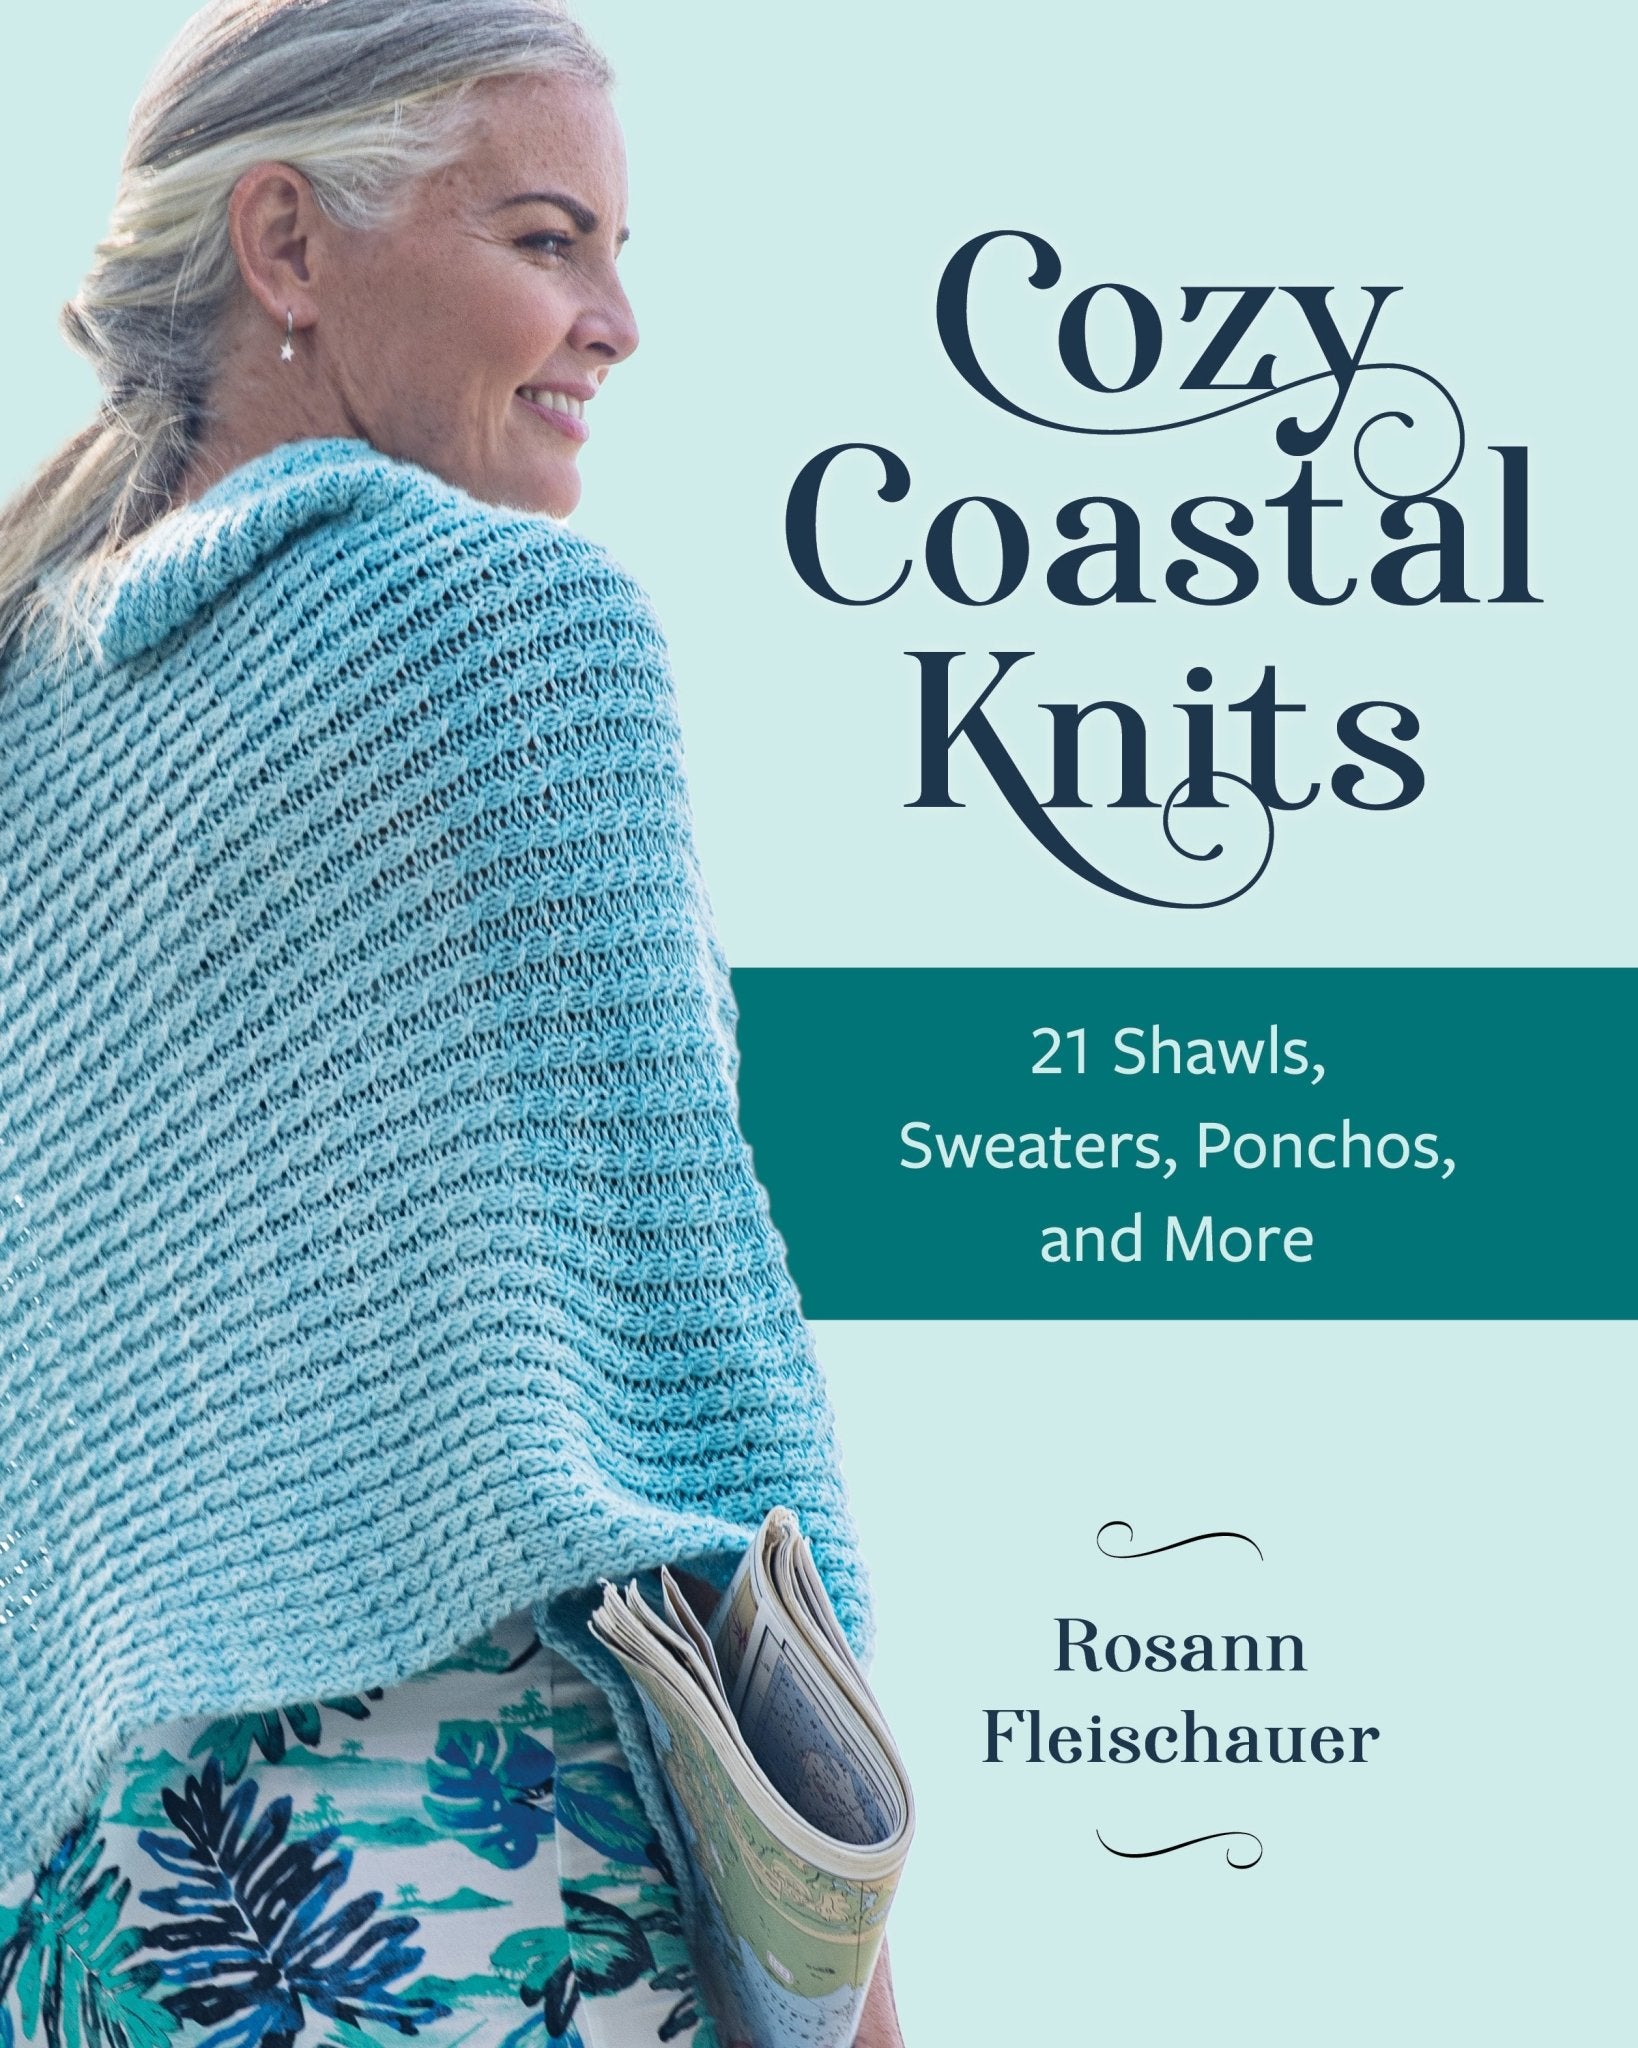 Chill Chasers: Knit 22 Cozy Sweaters, Scarves, & More!: Yarnspirations:  9781640210844: : Books